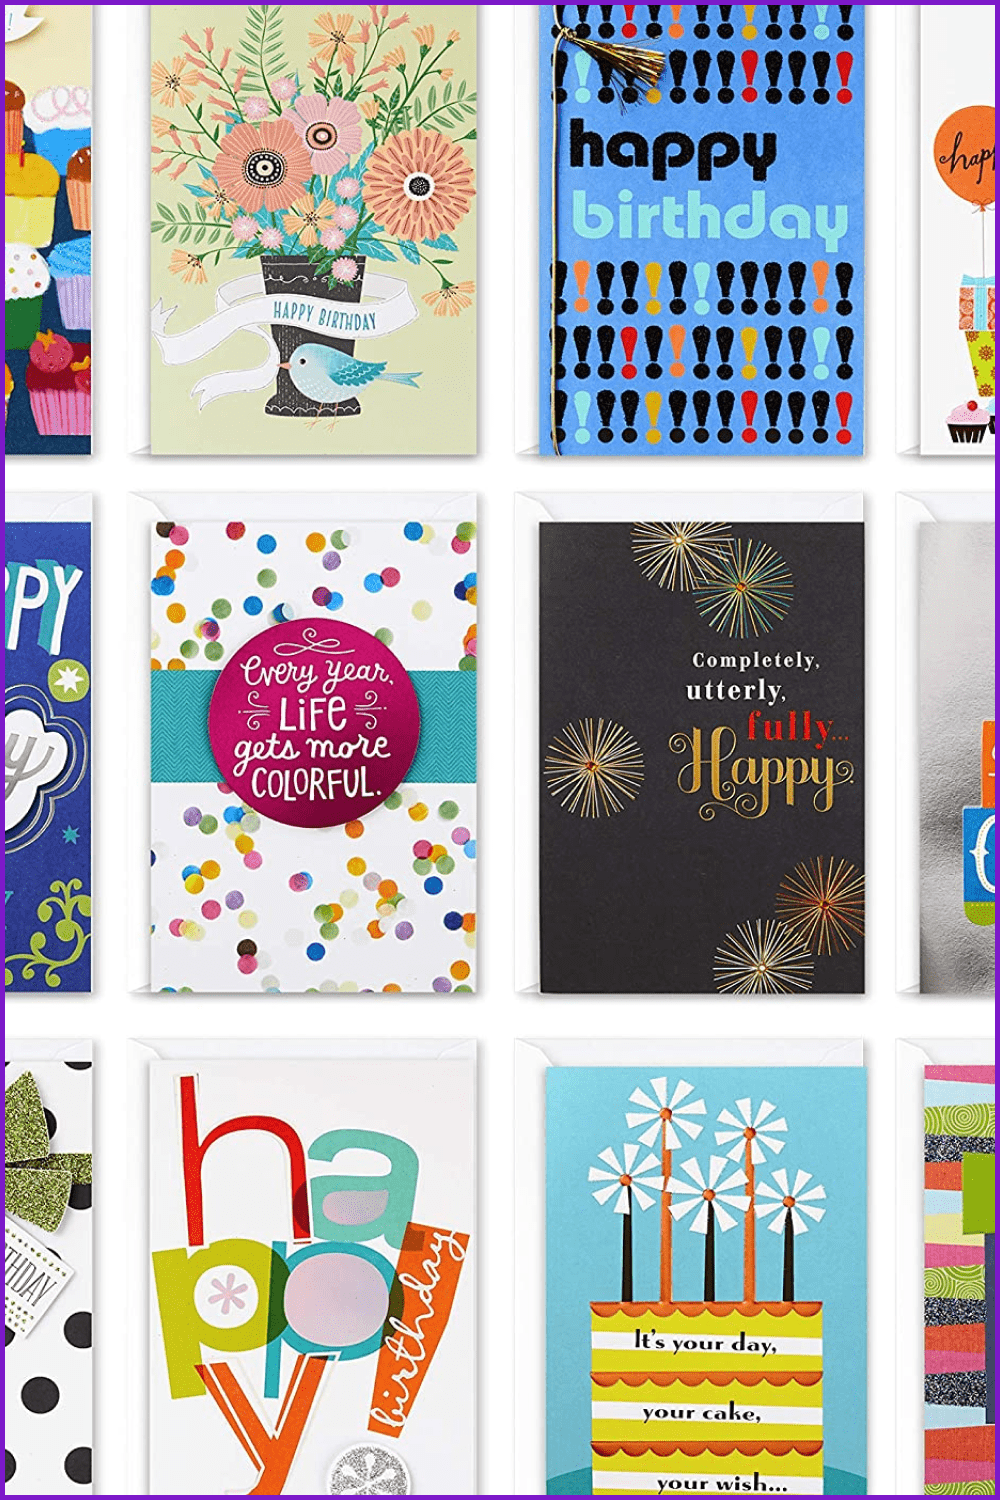 Collage of birthday cards in a fun and simple style.